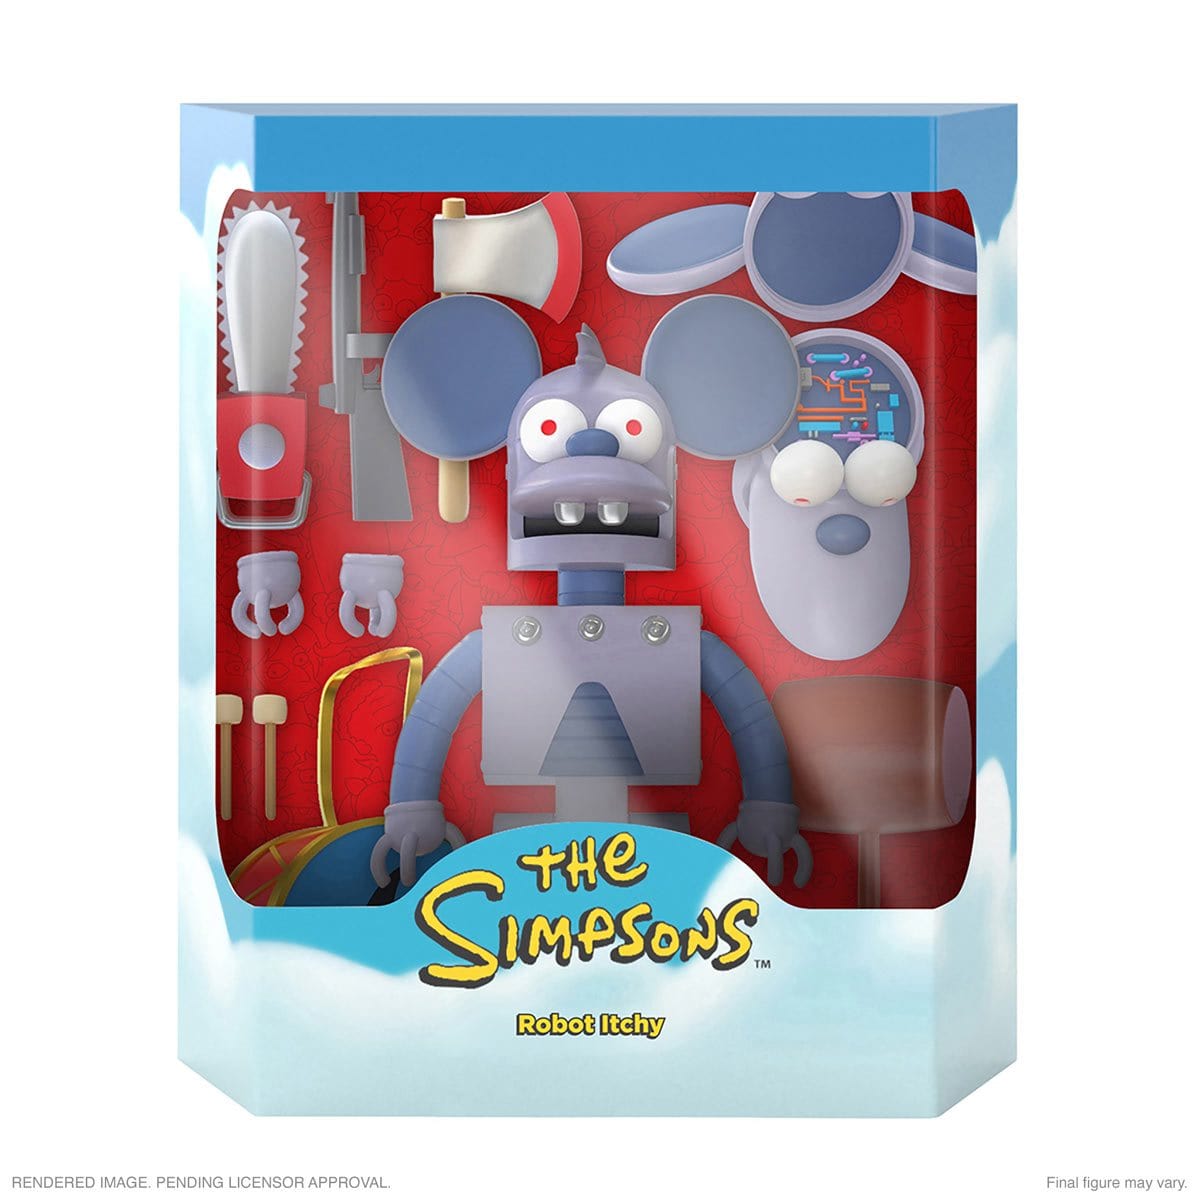 The Simpsons Robot Itchy Super7 Ultimates 7-Inch Action Figure - Pop-O-Loco - Super7